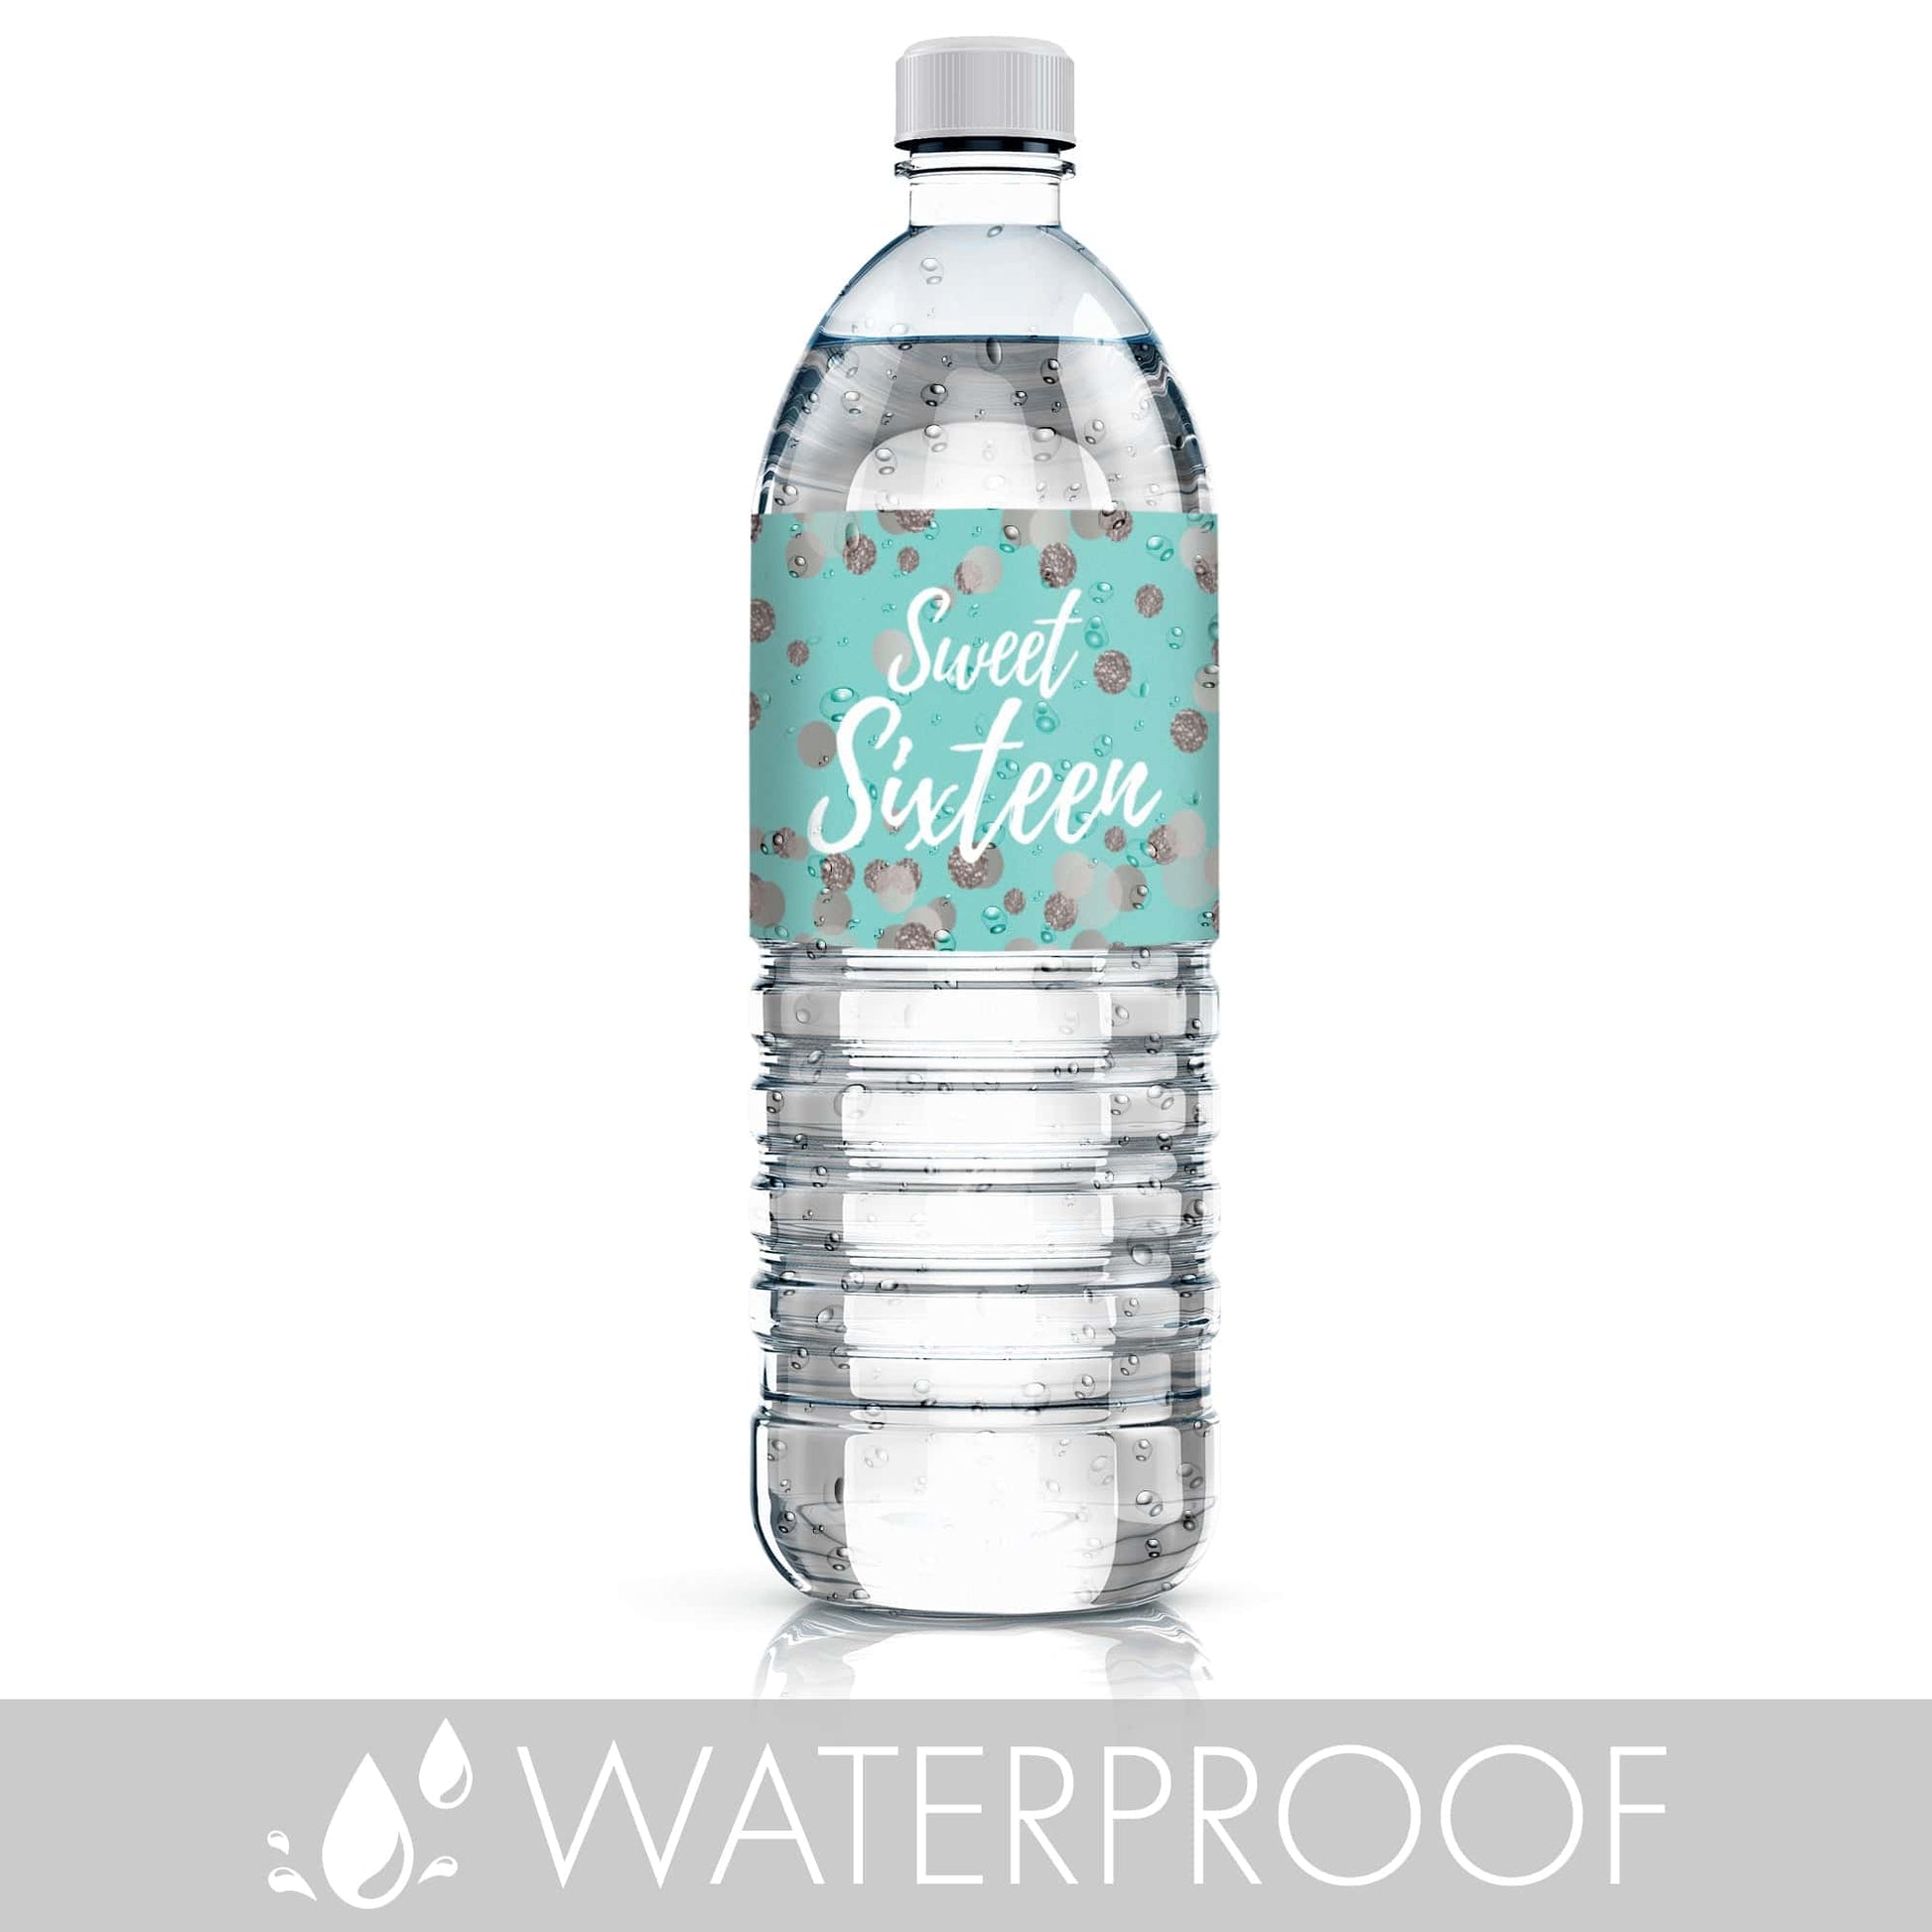 Celebrate in style with these sparkly blue and silver water bottle labels for your Sweet 16.